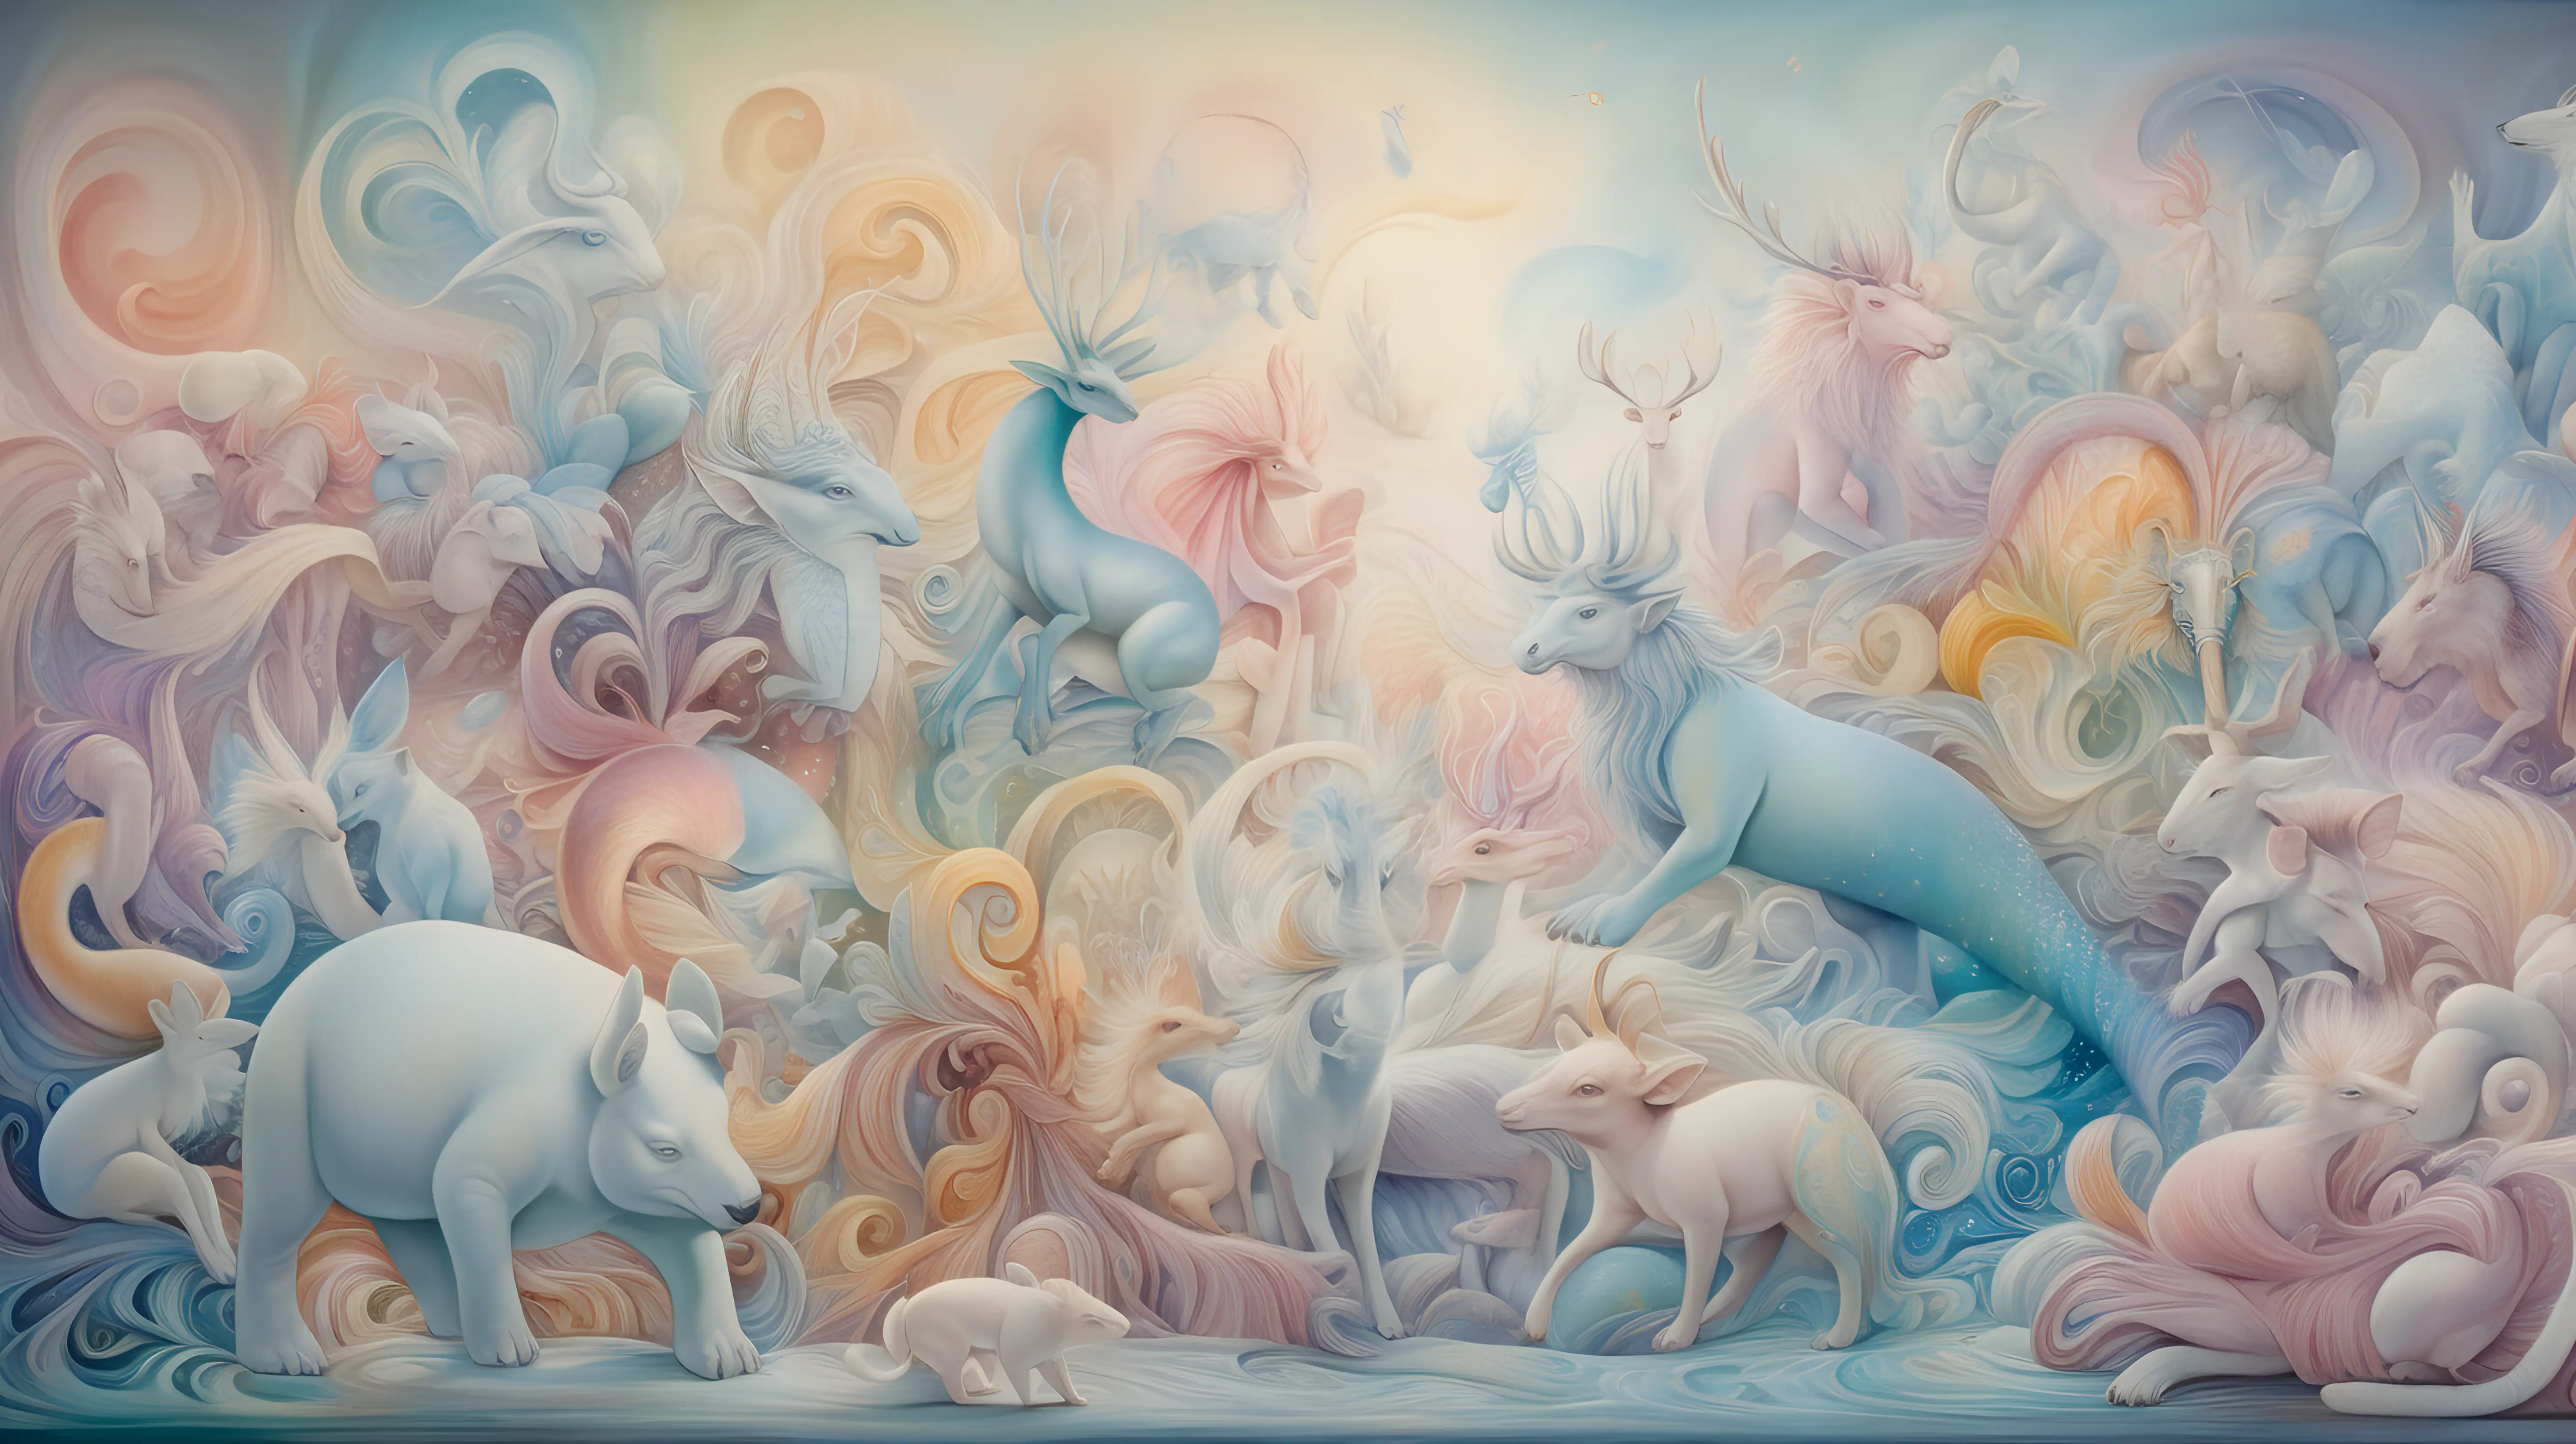 Paint a surreal dreamscape where fantastical creatures roam across a white wall canvas, their forms swirling together in an intricate dance of pastel colors and ethereal light, inviting viewers into a world of imagination and possibility.